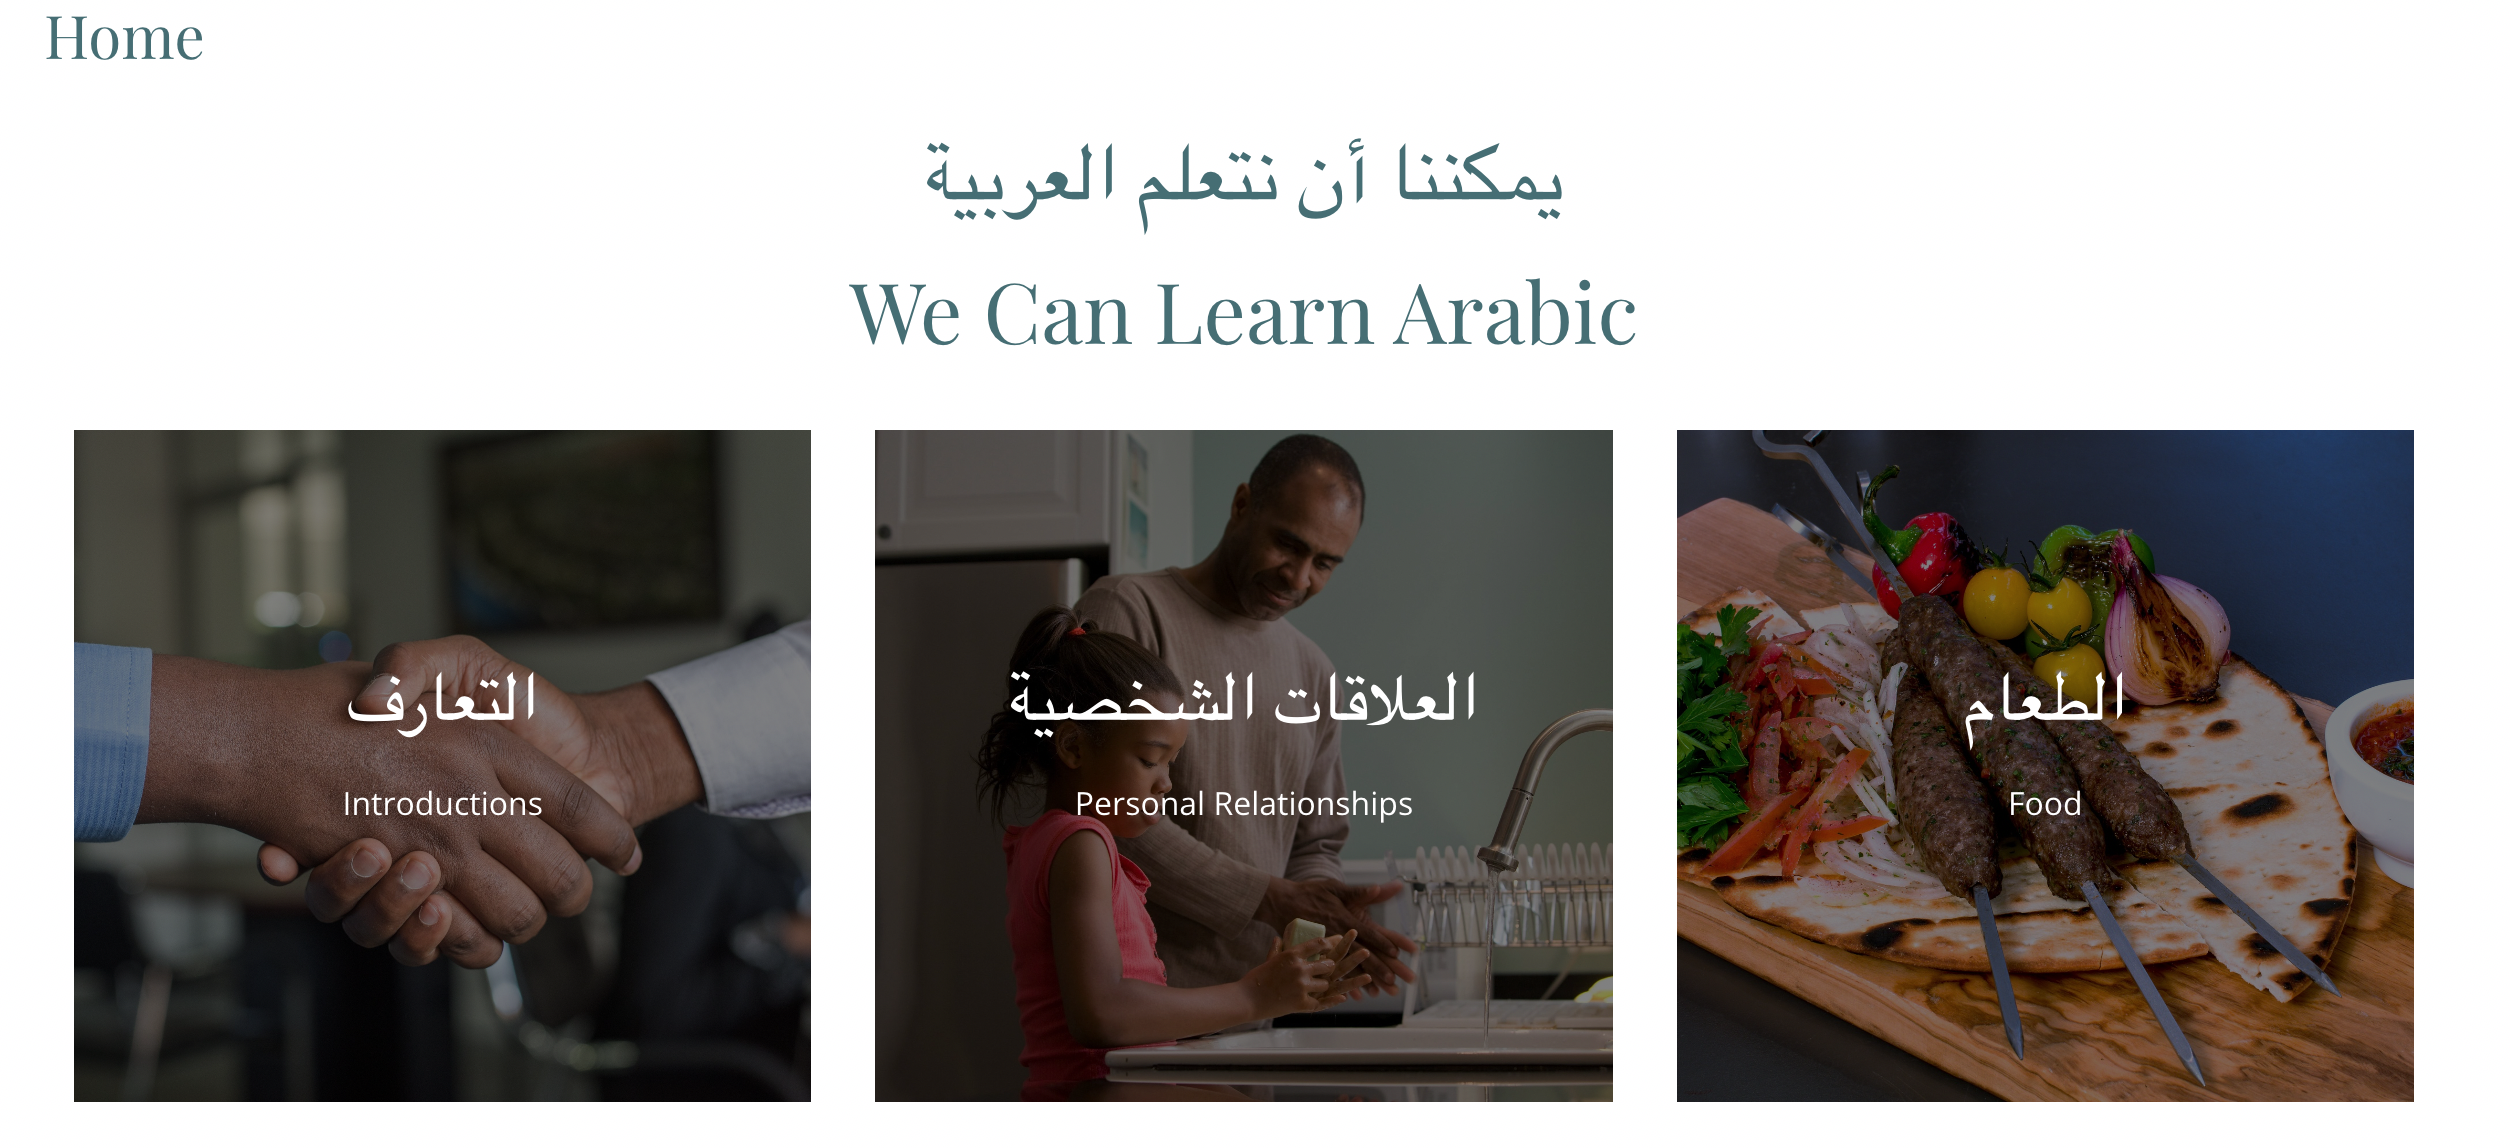 We Can Learn Arabic site updates